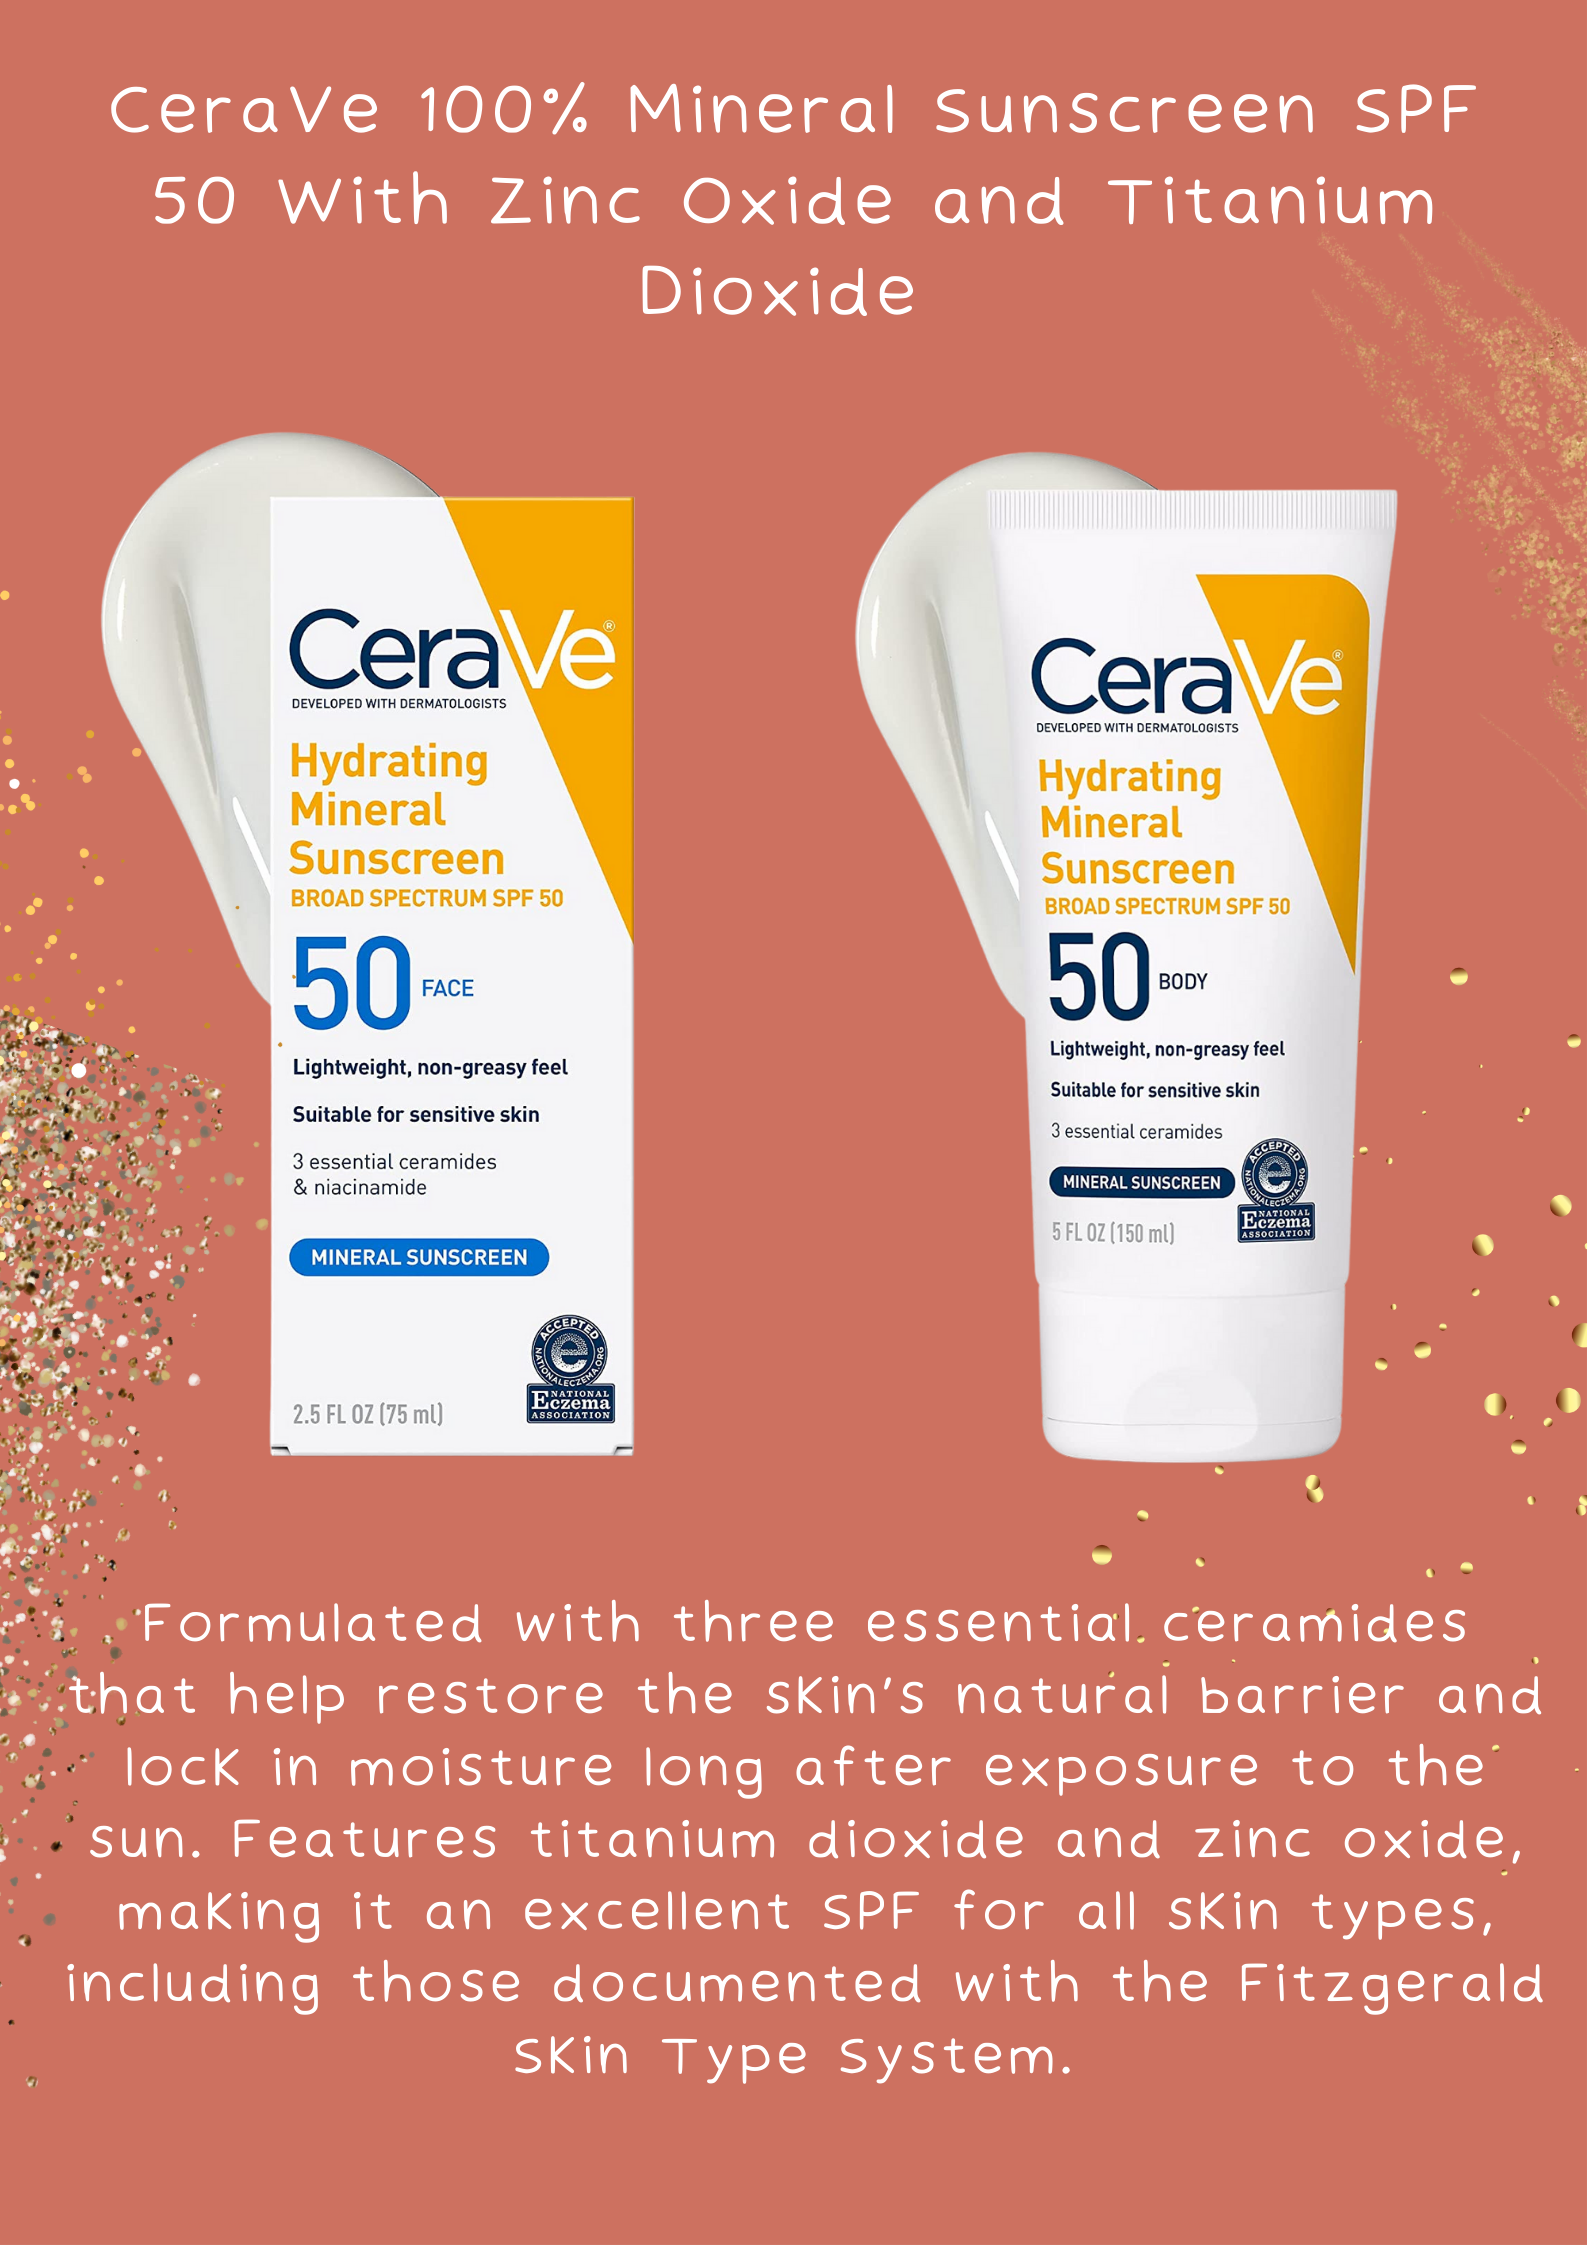 CeraVe 100% Mineral Body Sunscreen SPF 50 with Zinc Oxide and Titanium Dioxide